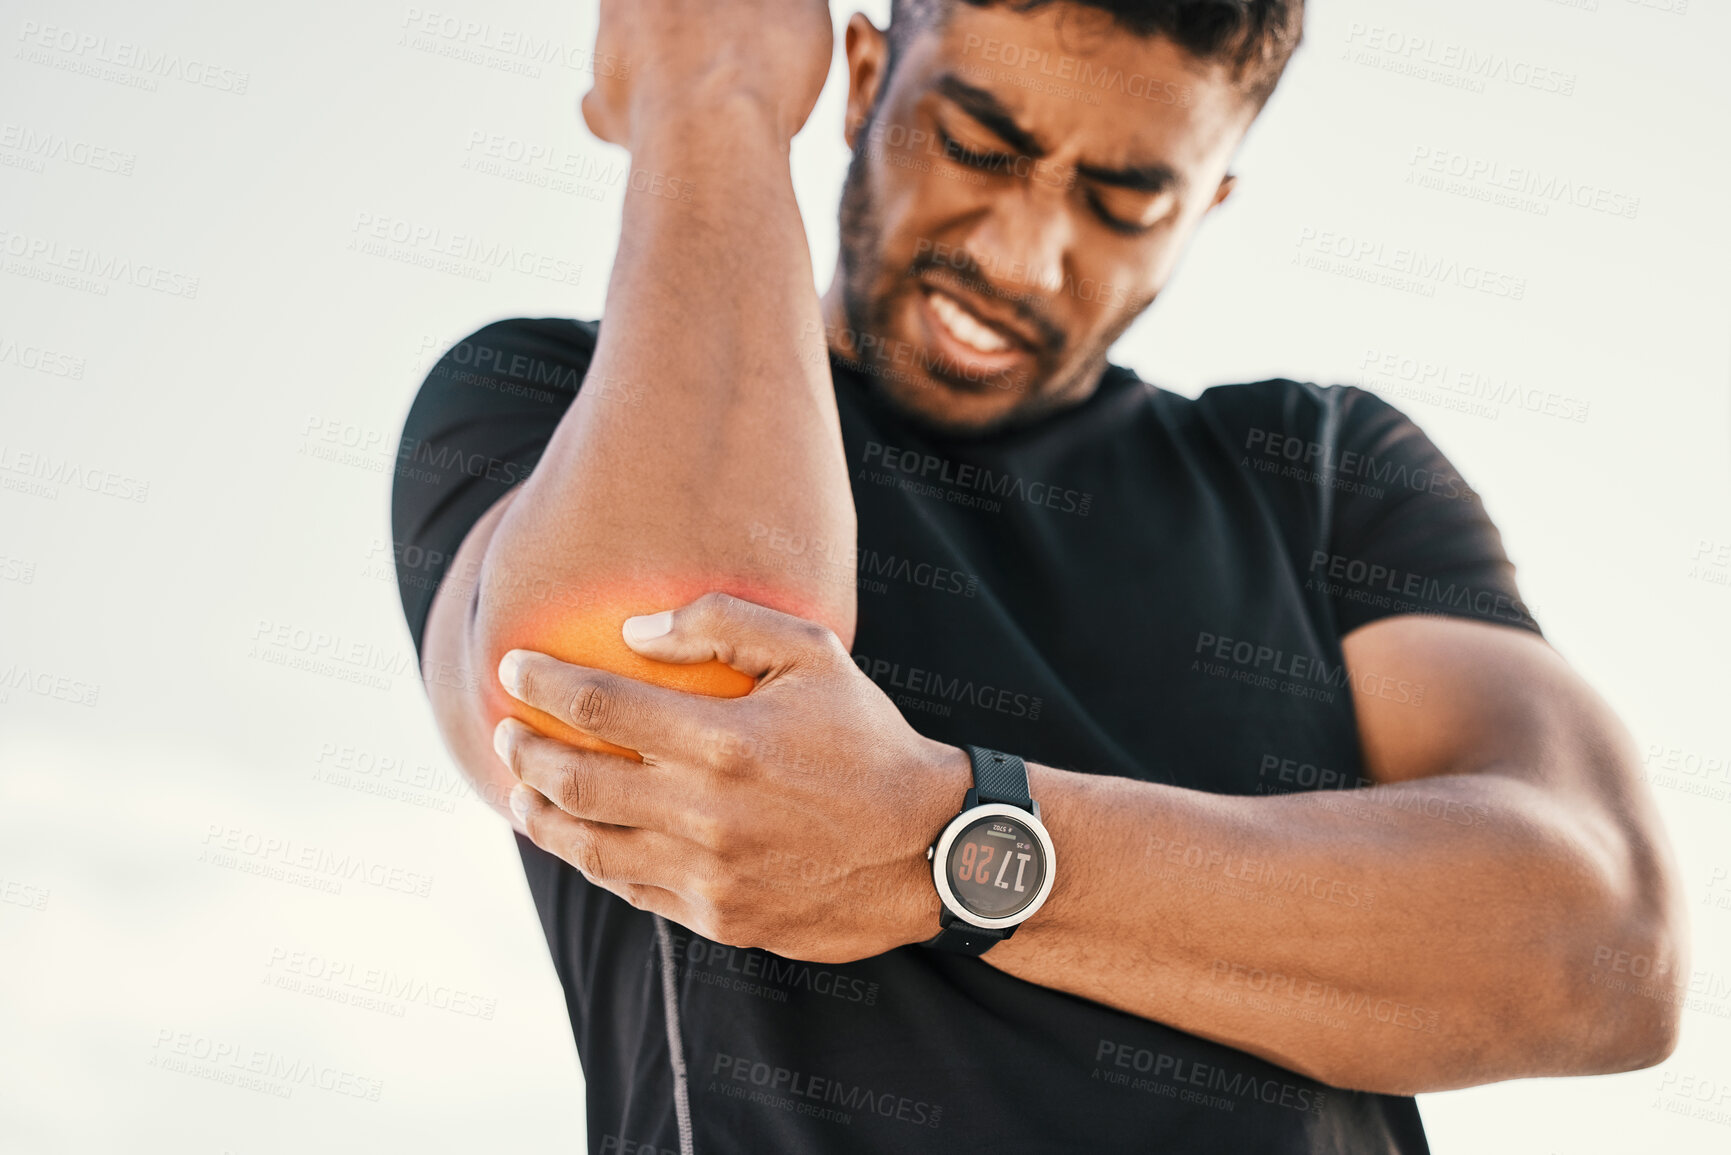 Buy stock photo Cropped shot of a handsome young male athlete holding his elbow in pain while exercising on the beach